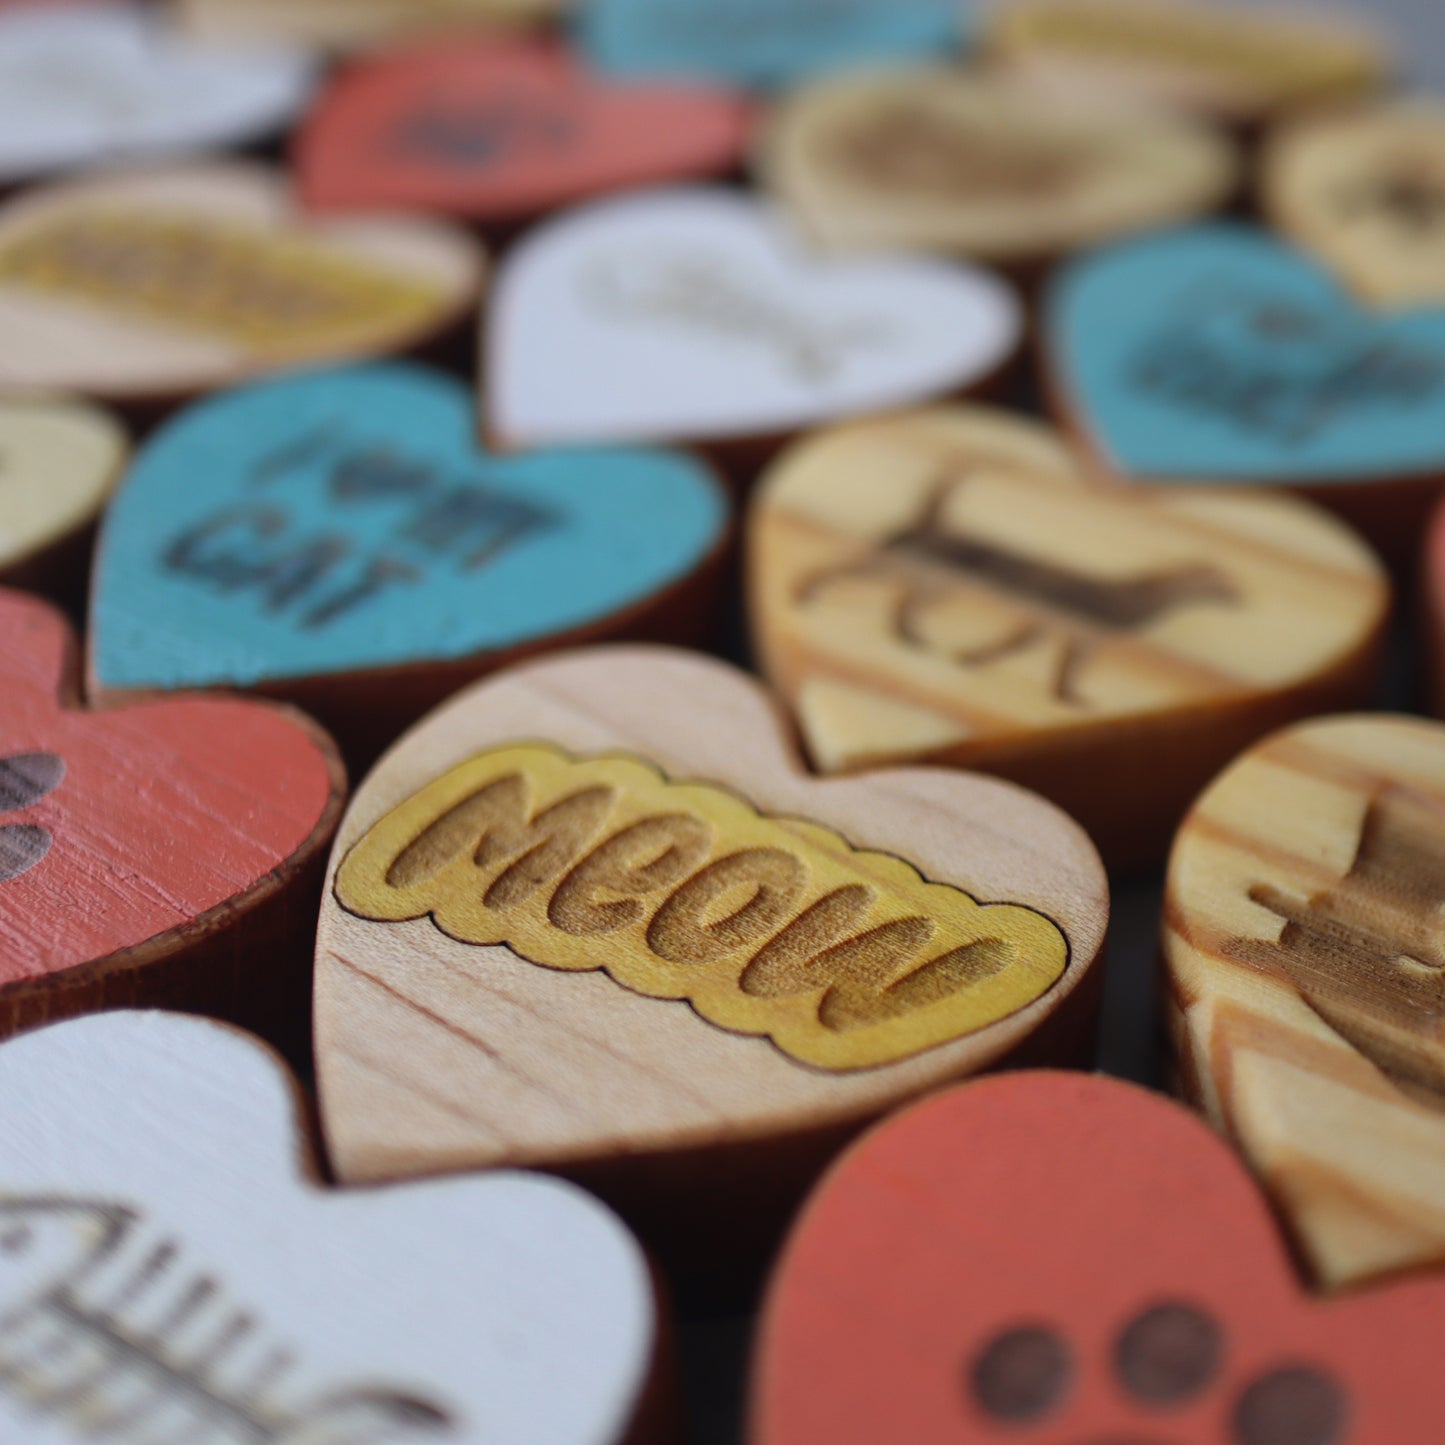 Love Your Pets :: Engraved Heart Sets